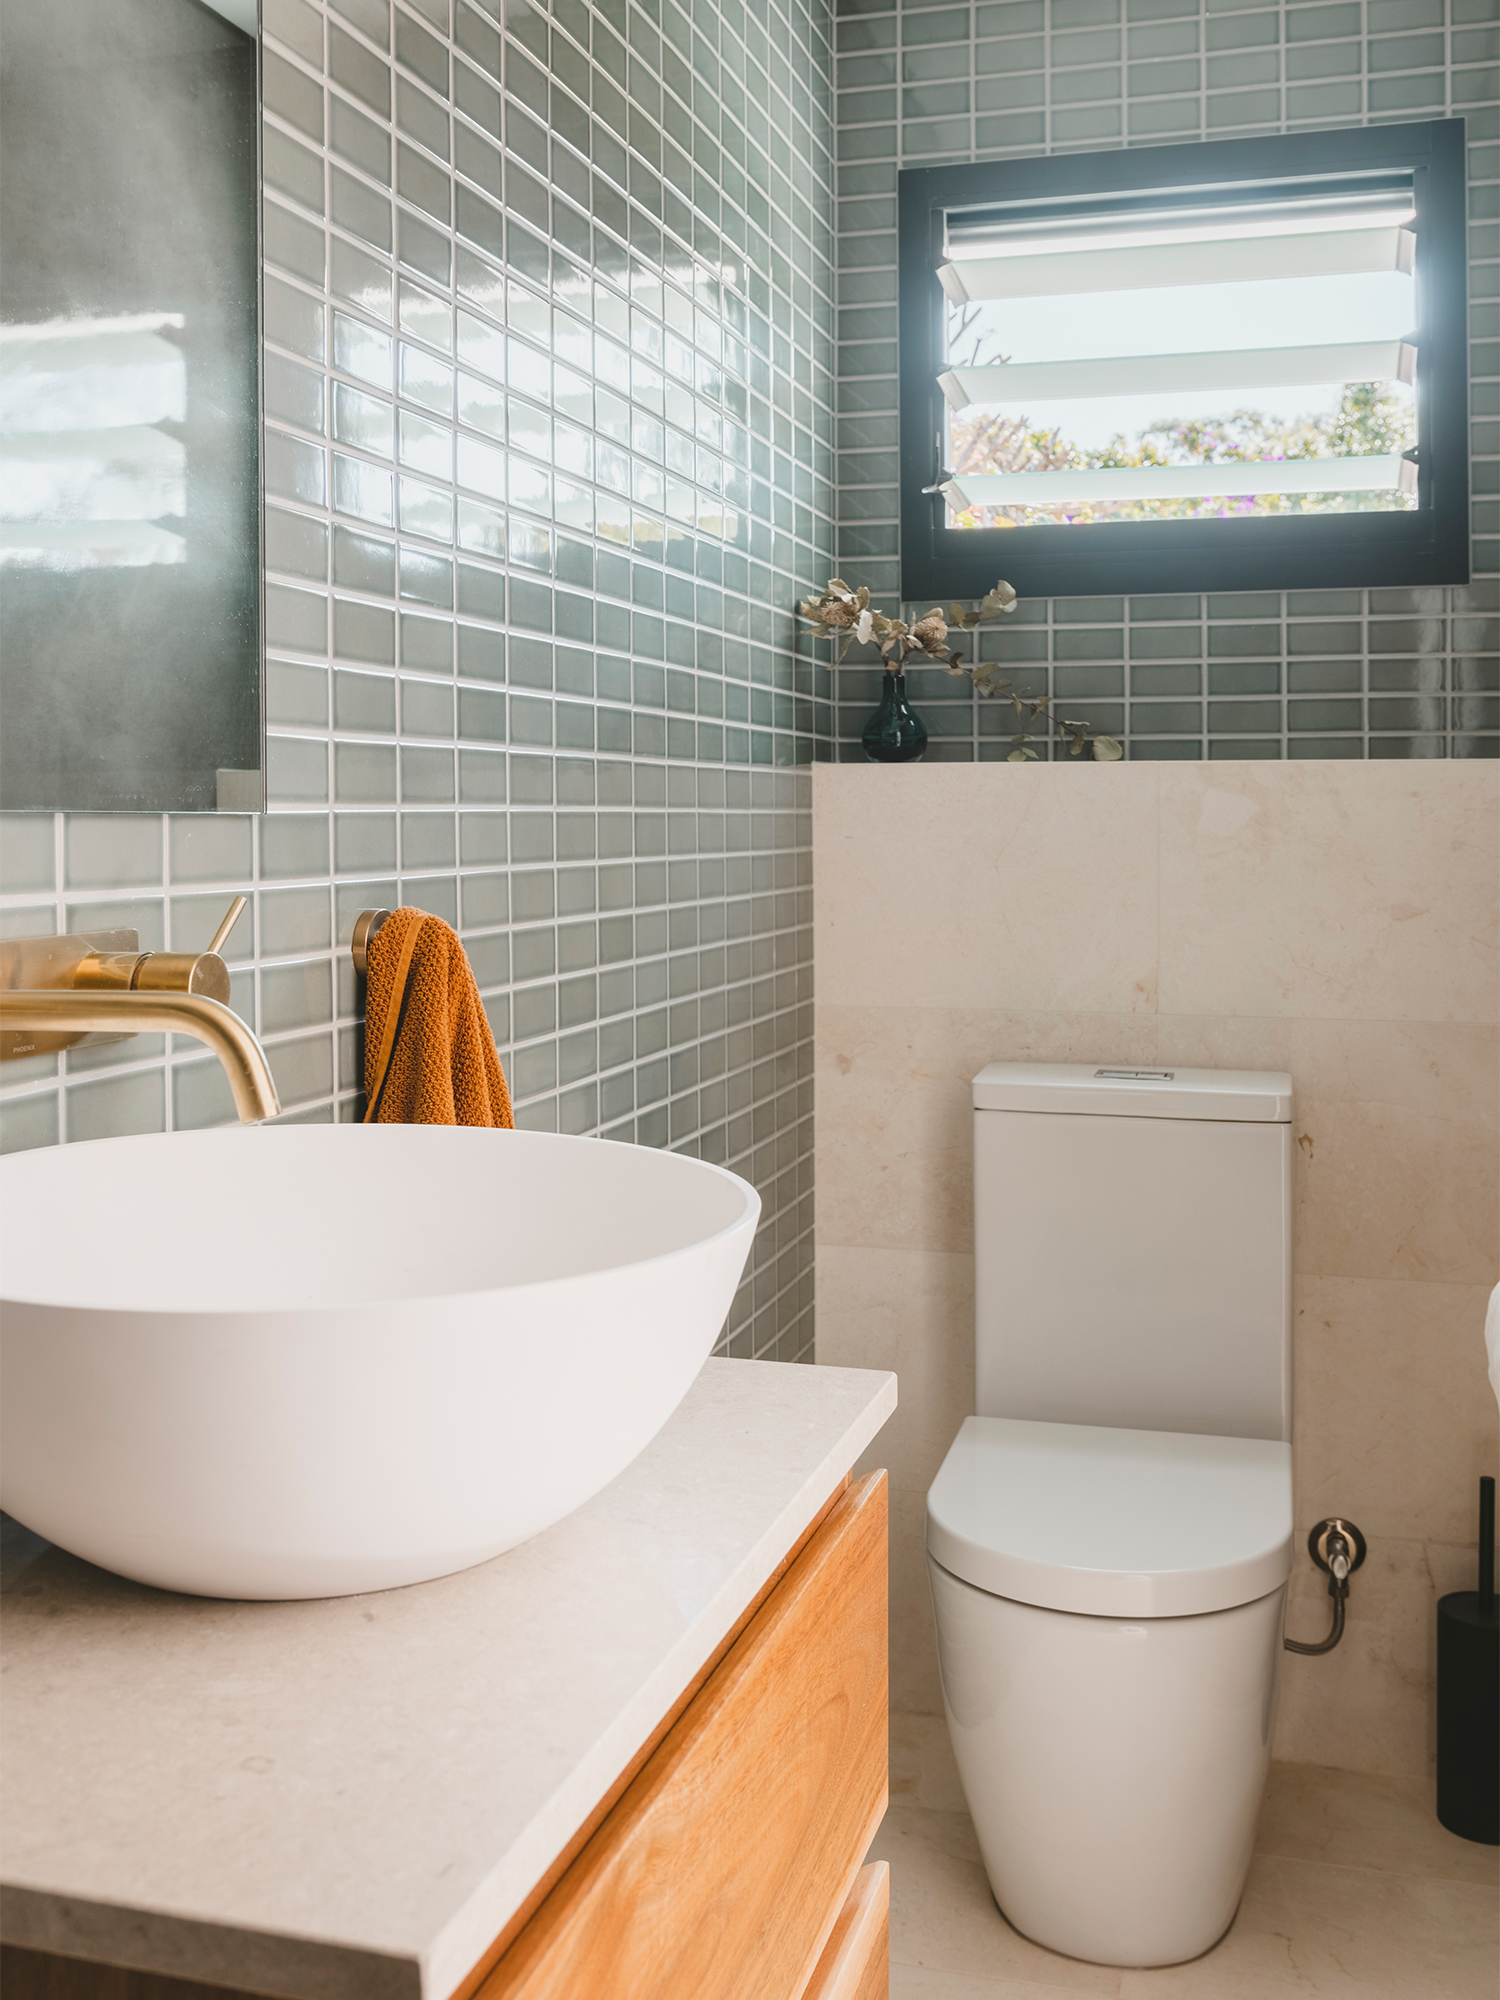 How to bring glamour to your bathroom renovation